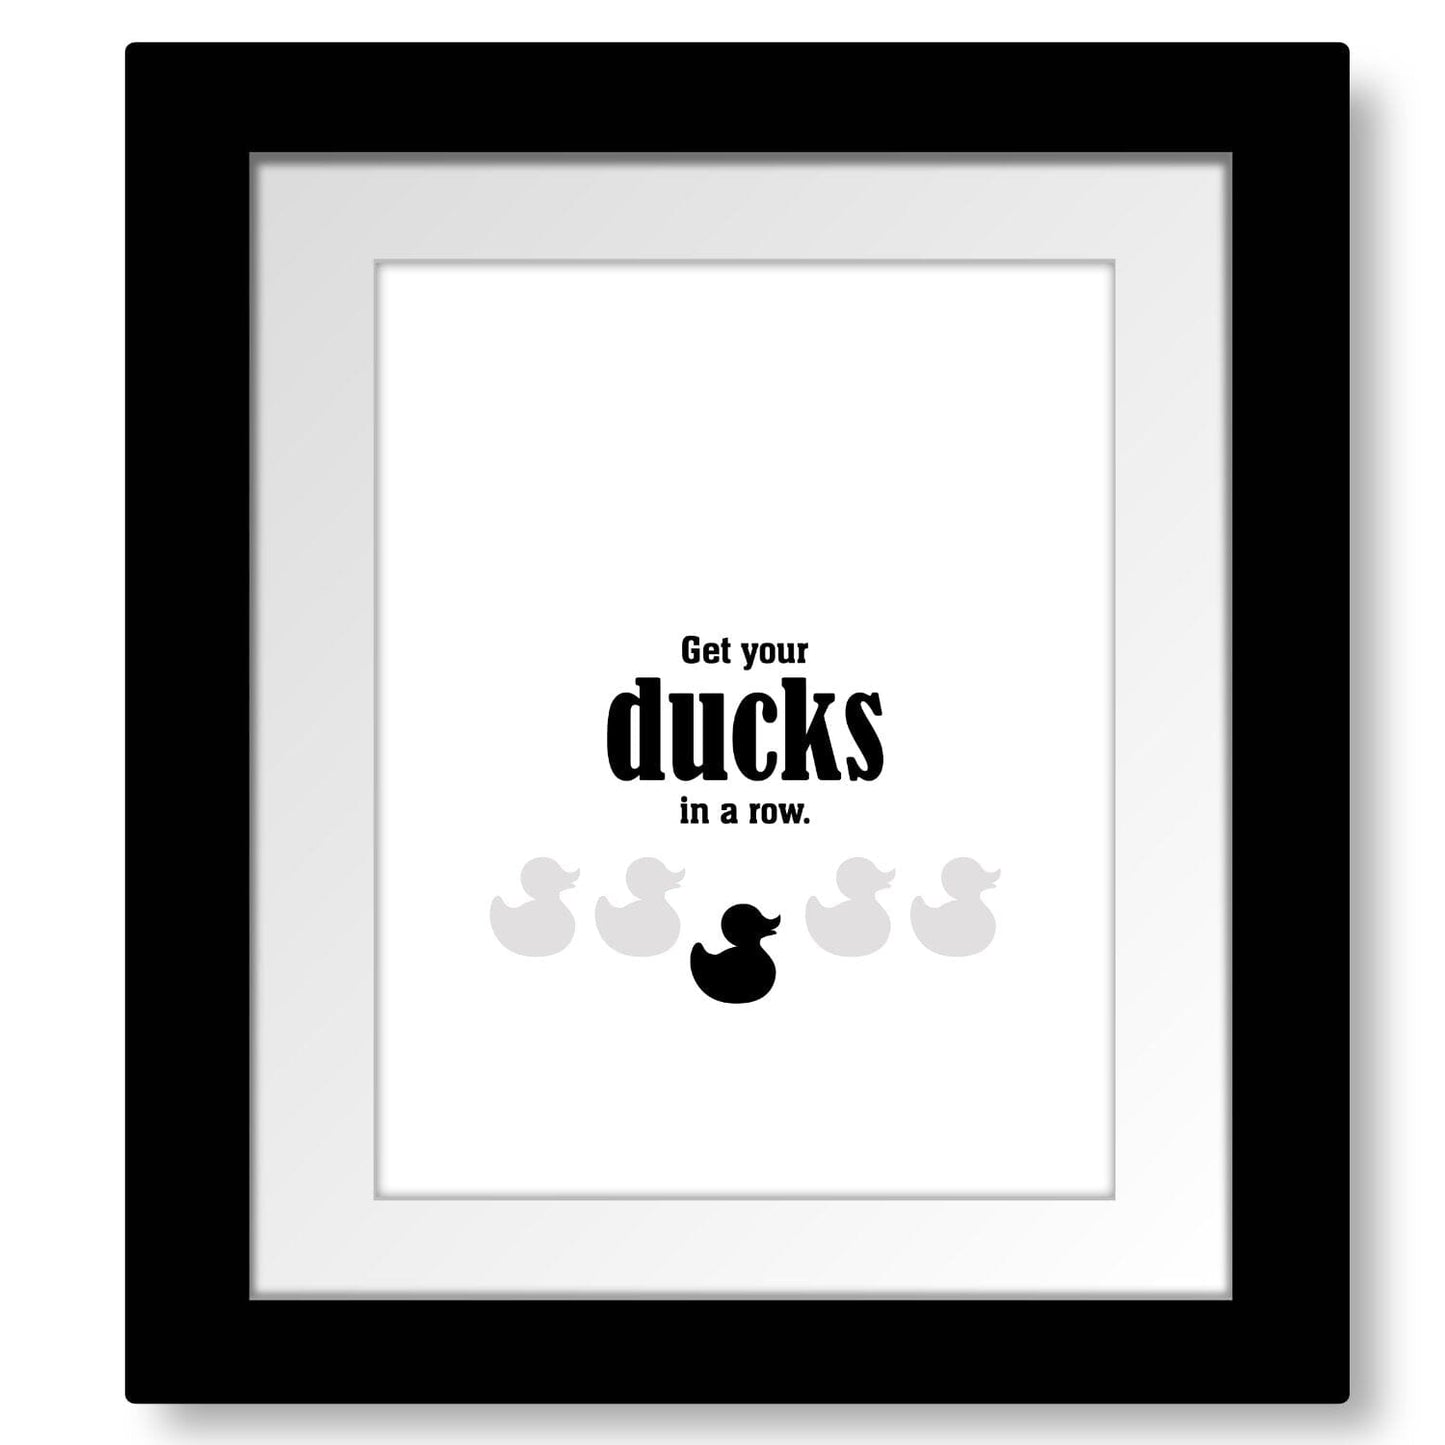 Wise and Witty Sarcastic Print - Get Your Ducks in a Row Wise and Wiseass Quotes Song Lyrics Art 8x10 Framed and Matted Print 